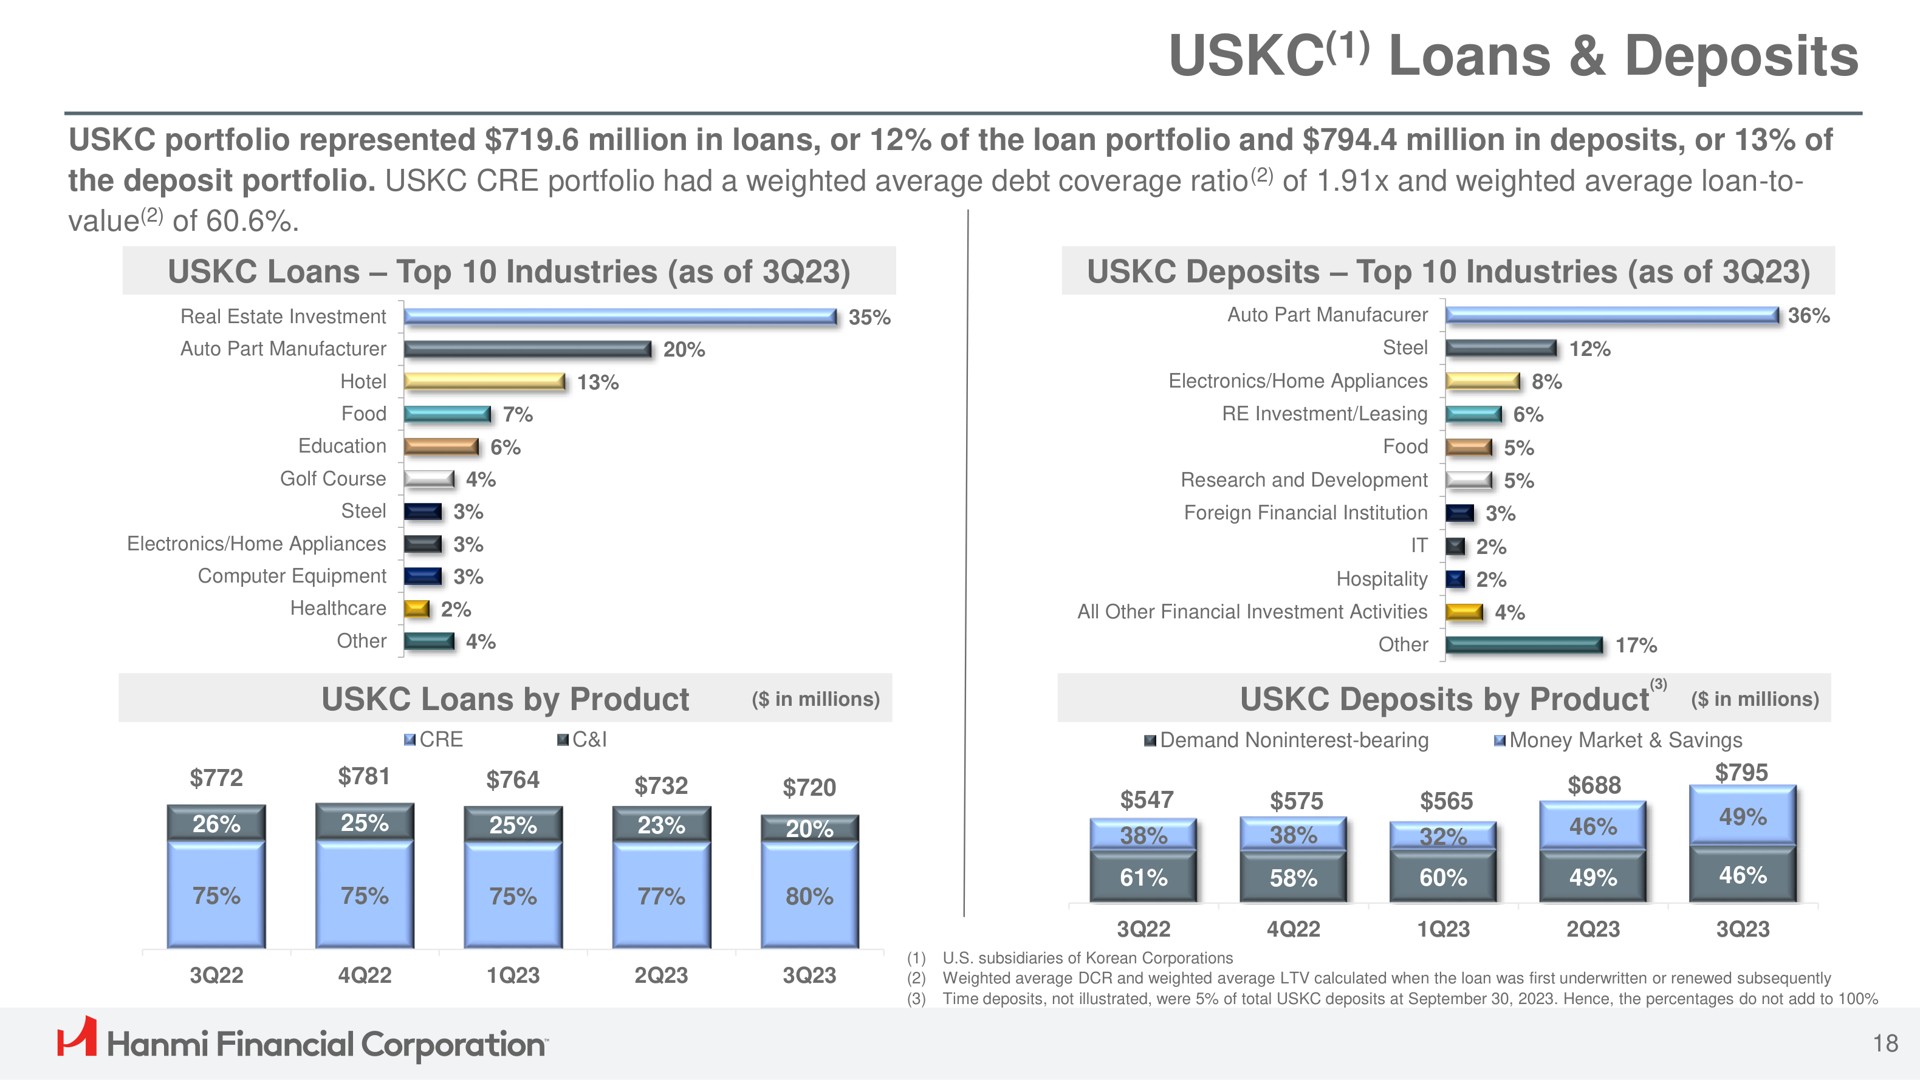 loans deposits by product in millions financial corporation | Hanmi Financial